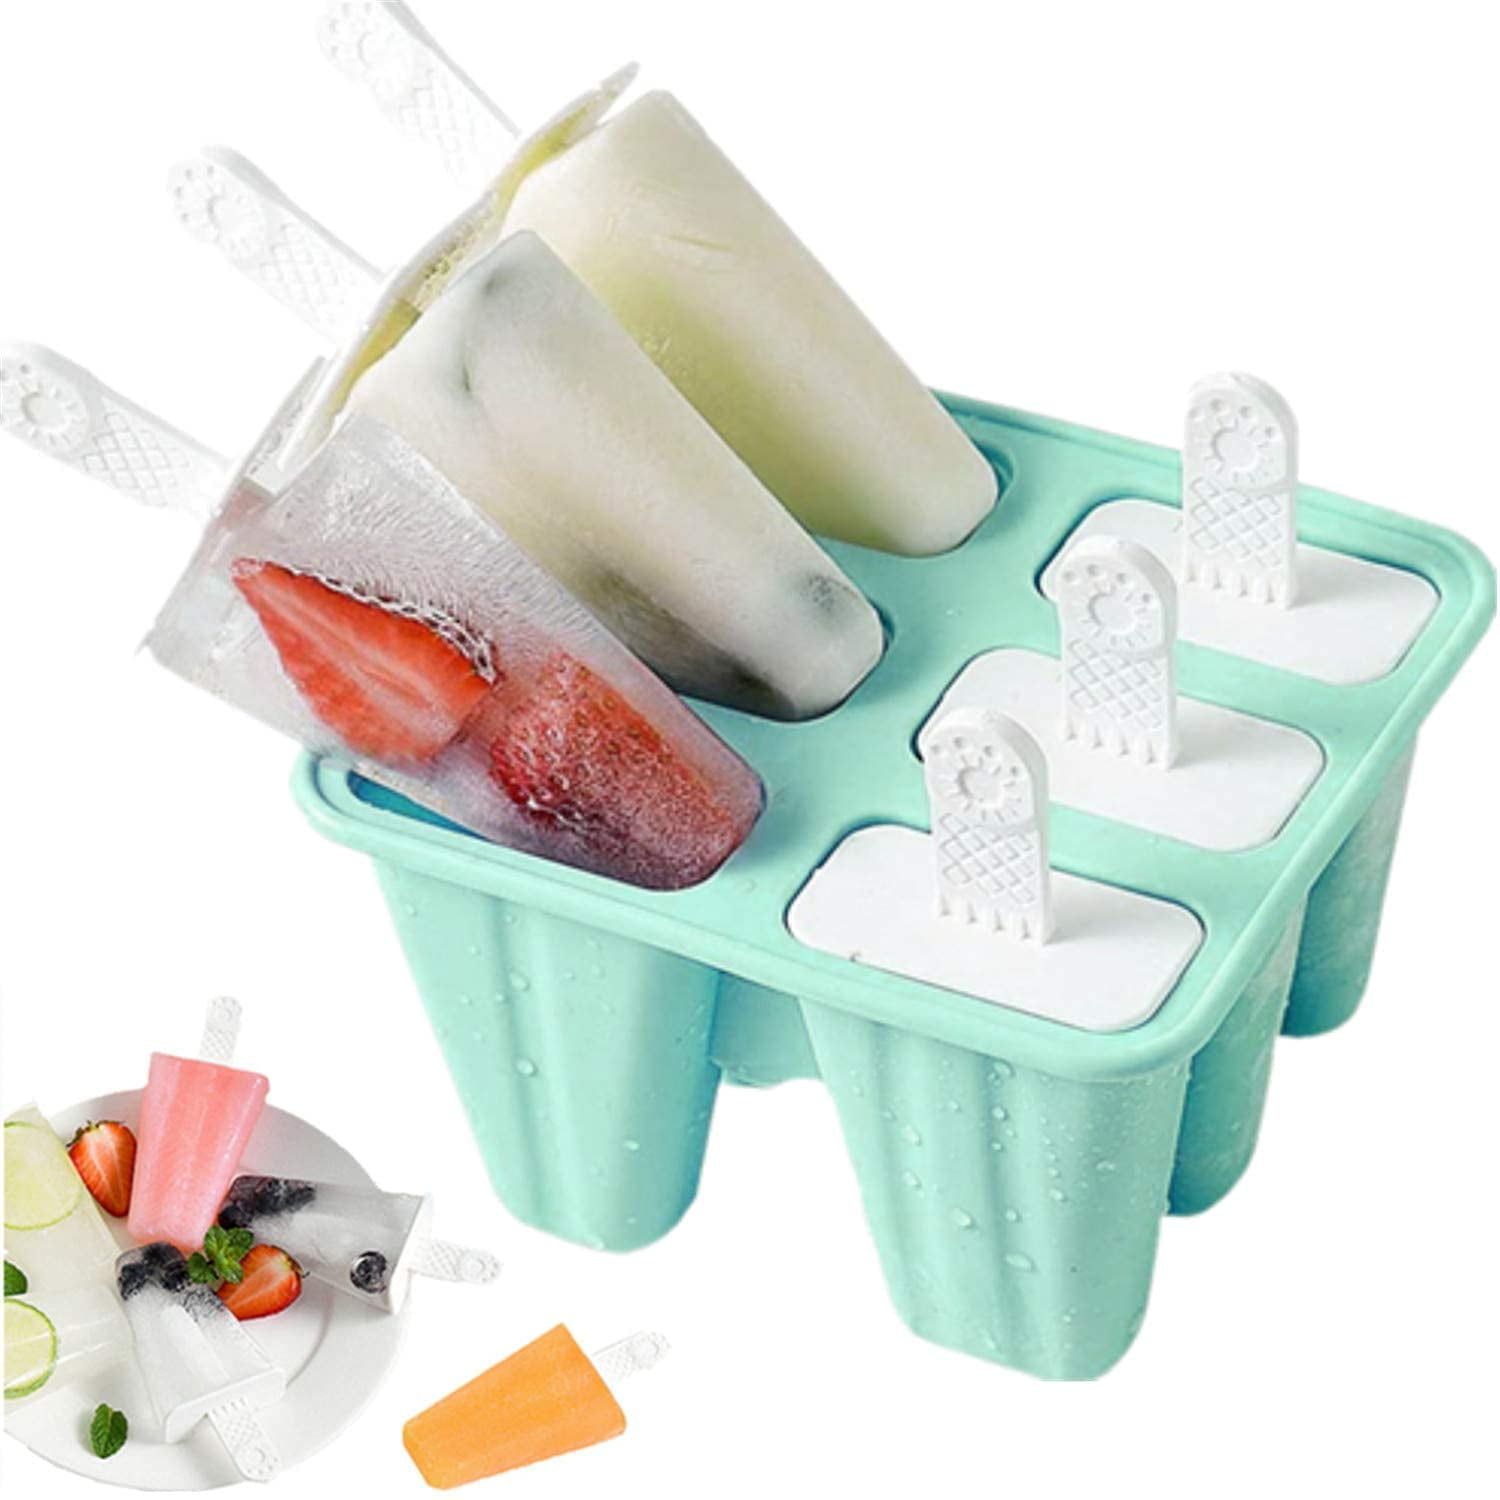 Dropship 6Pcs Popsicle Molds Reusable Ice Cream DIY Ice Pop Maker Ice Bar  Maker Plastic Popsicle Mold For Homemade Iced Snacks to Sell Online at a  Lower Price